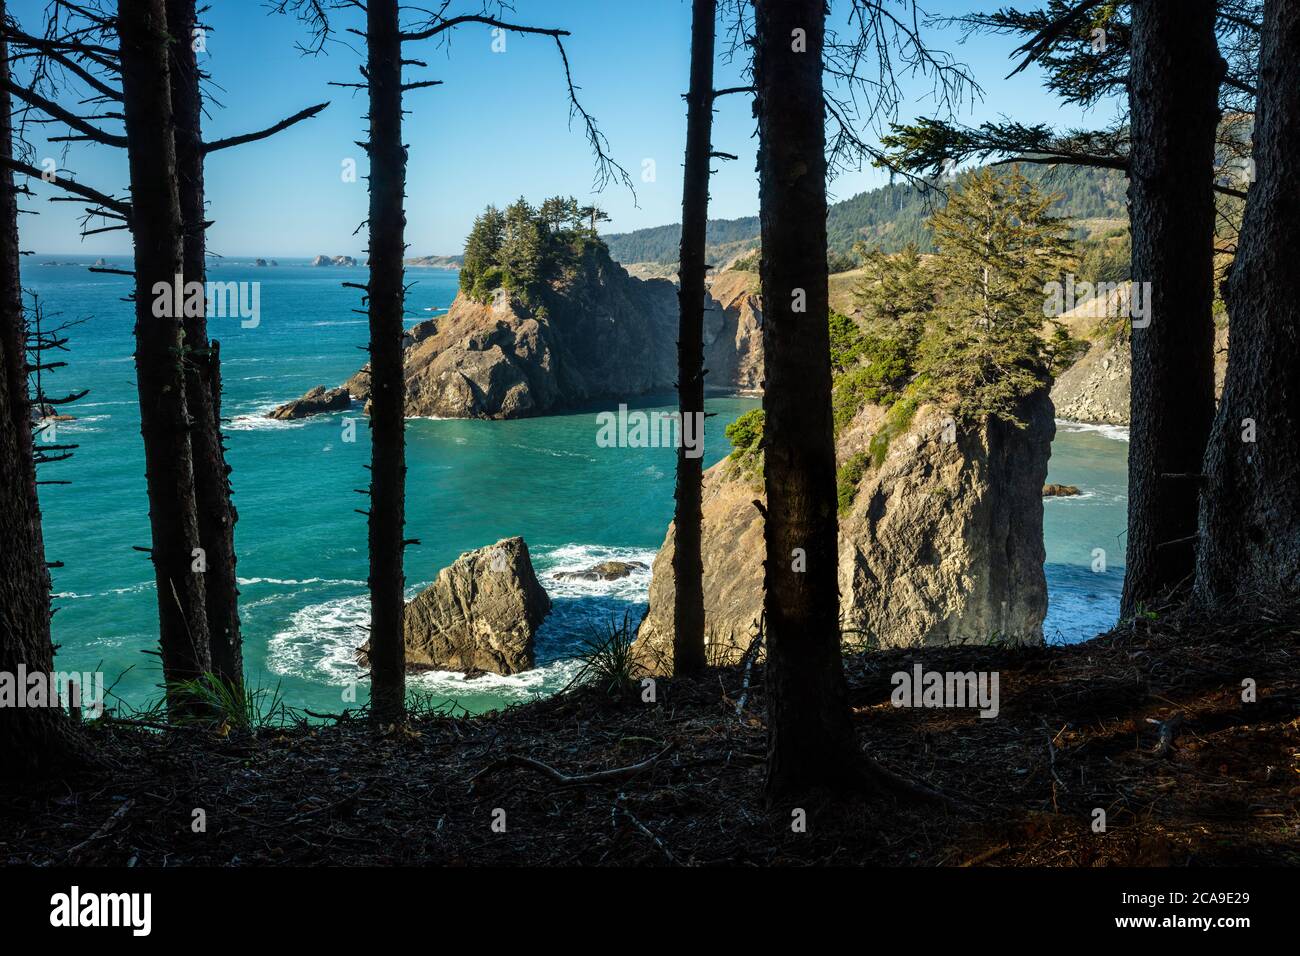 Seastacks and the Pacific Ocean seen through the trees, Windy Point, Arch Rock Picnic Area, Samuel H. Boardman State Park, Oregon Stock Photo